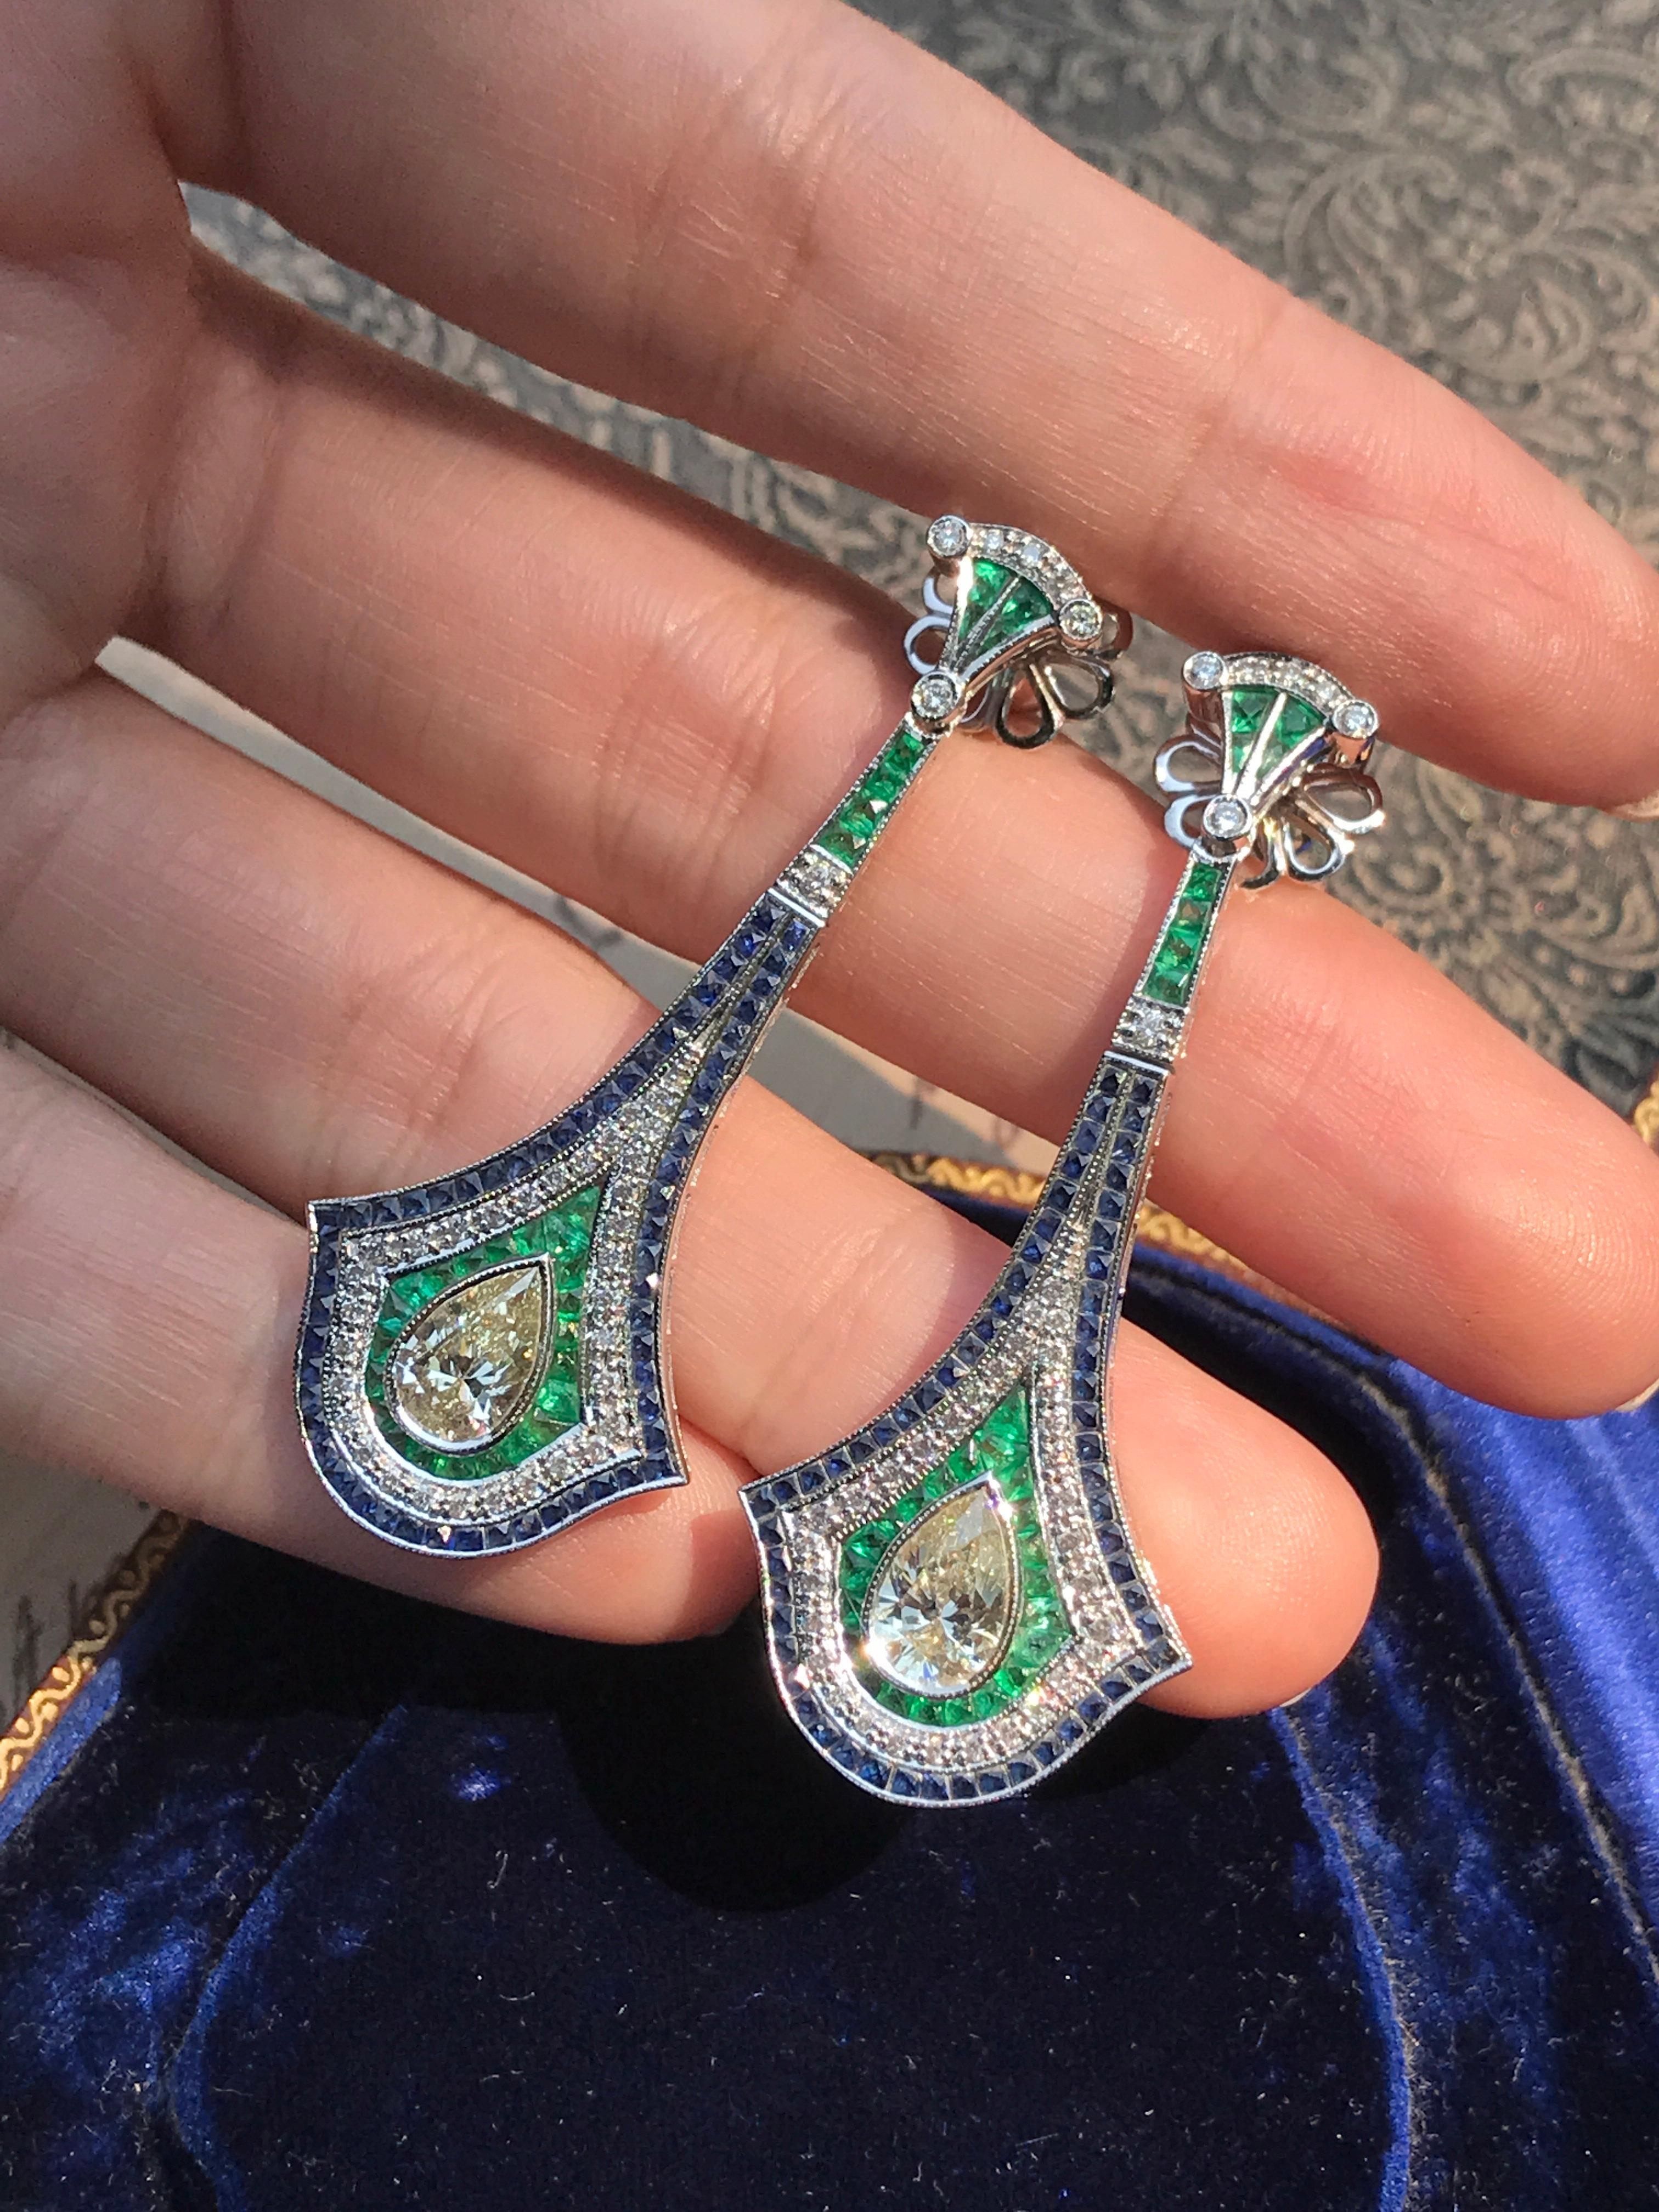 Extraordinary GIA certified pear shape diamond with emerald and sapphire Art Deco inspired earrings, all mounted in 18K white gold. The inner-halo is set with French cut vivid green emeralds. The outer-halo set with white round brilliant diamond and